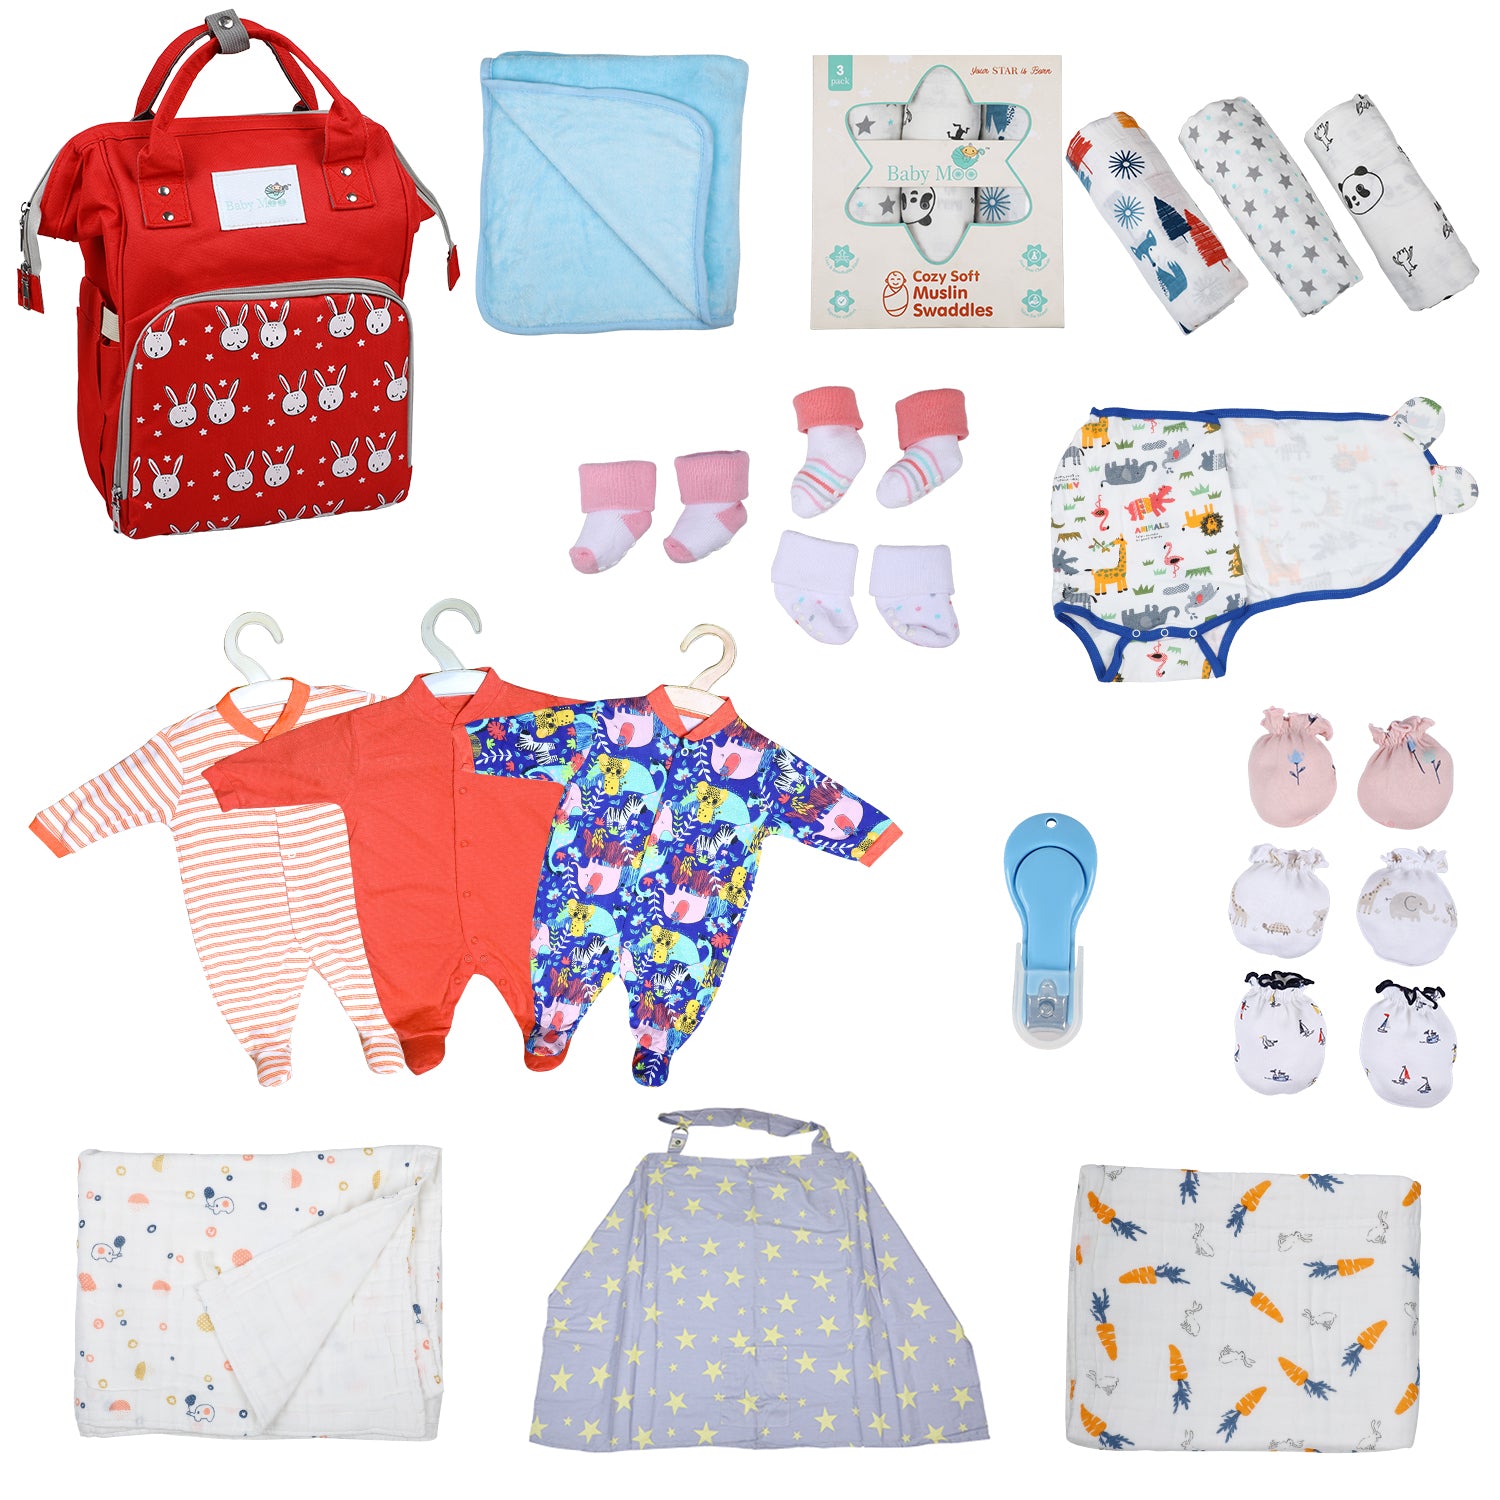 Portable bed, changing table and diaper bag - Bestmomz للأطفال